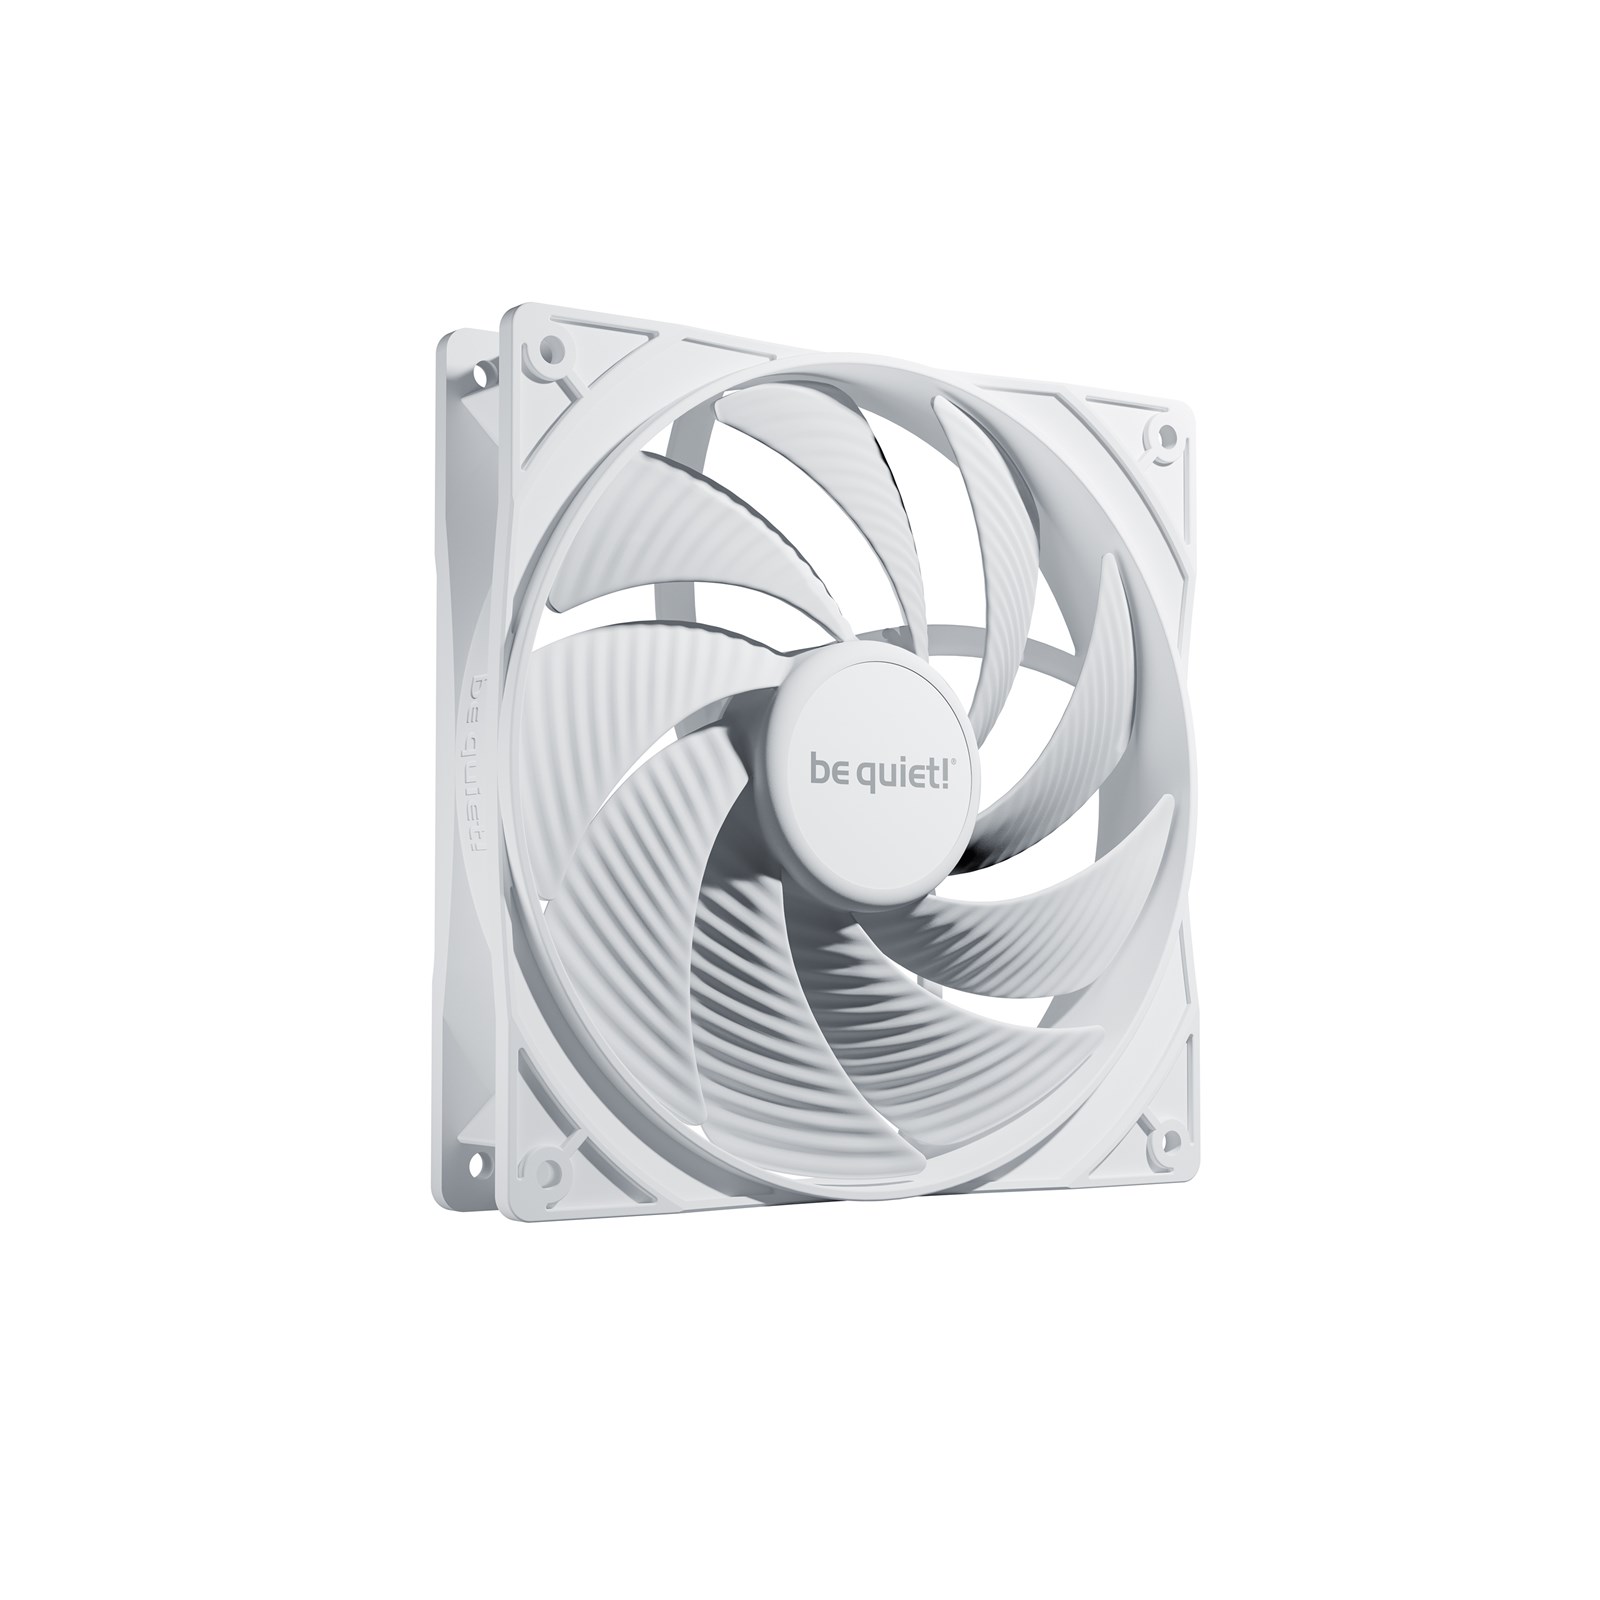 Photos - Computer Cooling be quiet! Be Quiet Pure Wings 3 PWM High Speed 140mm Chassis Fan in White BL113 